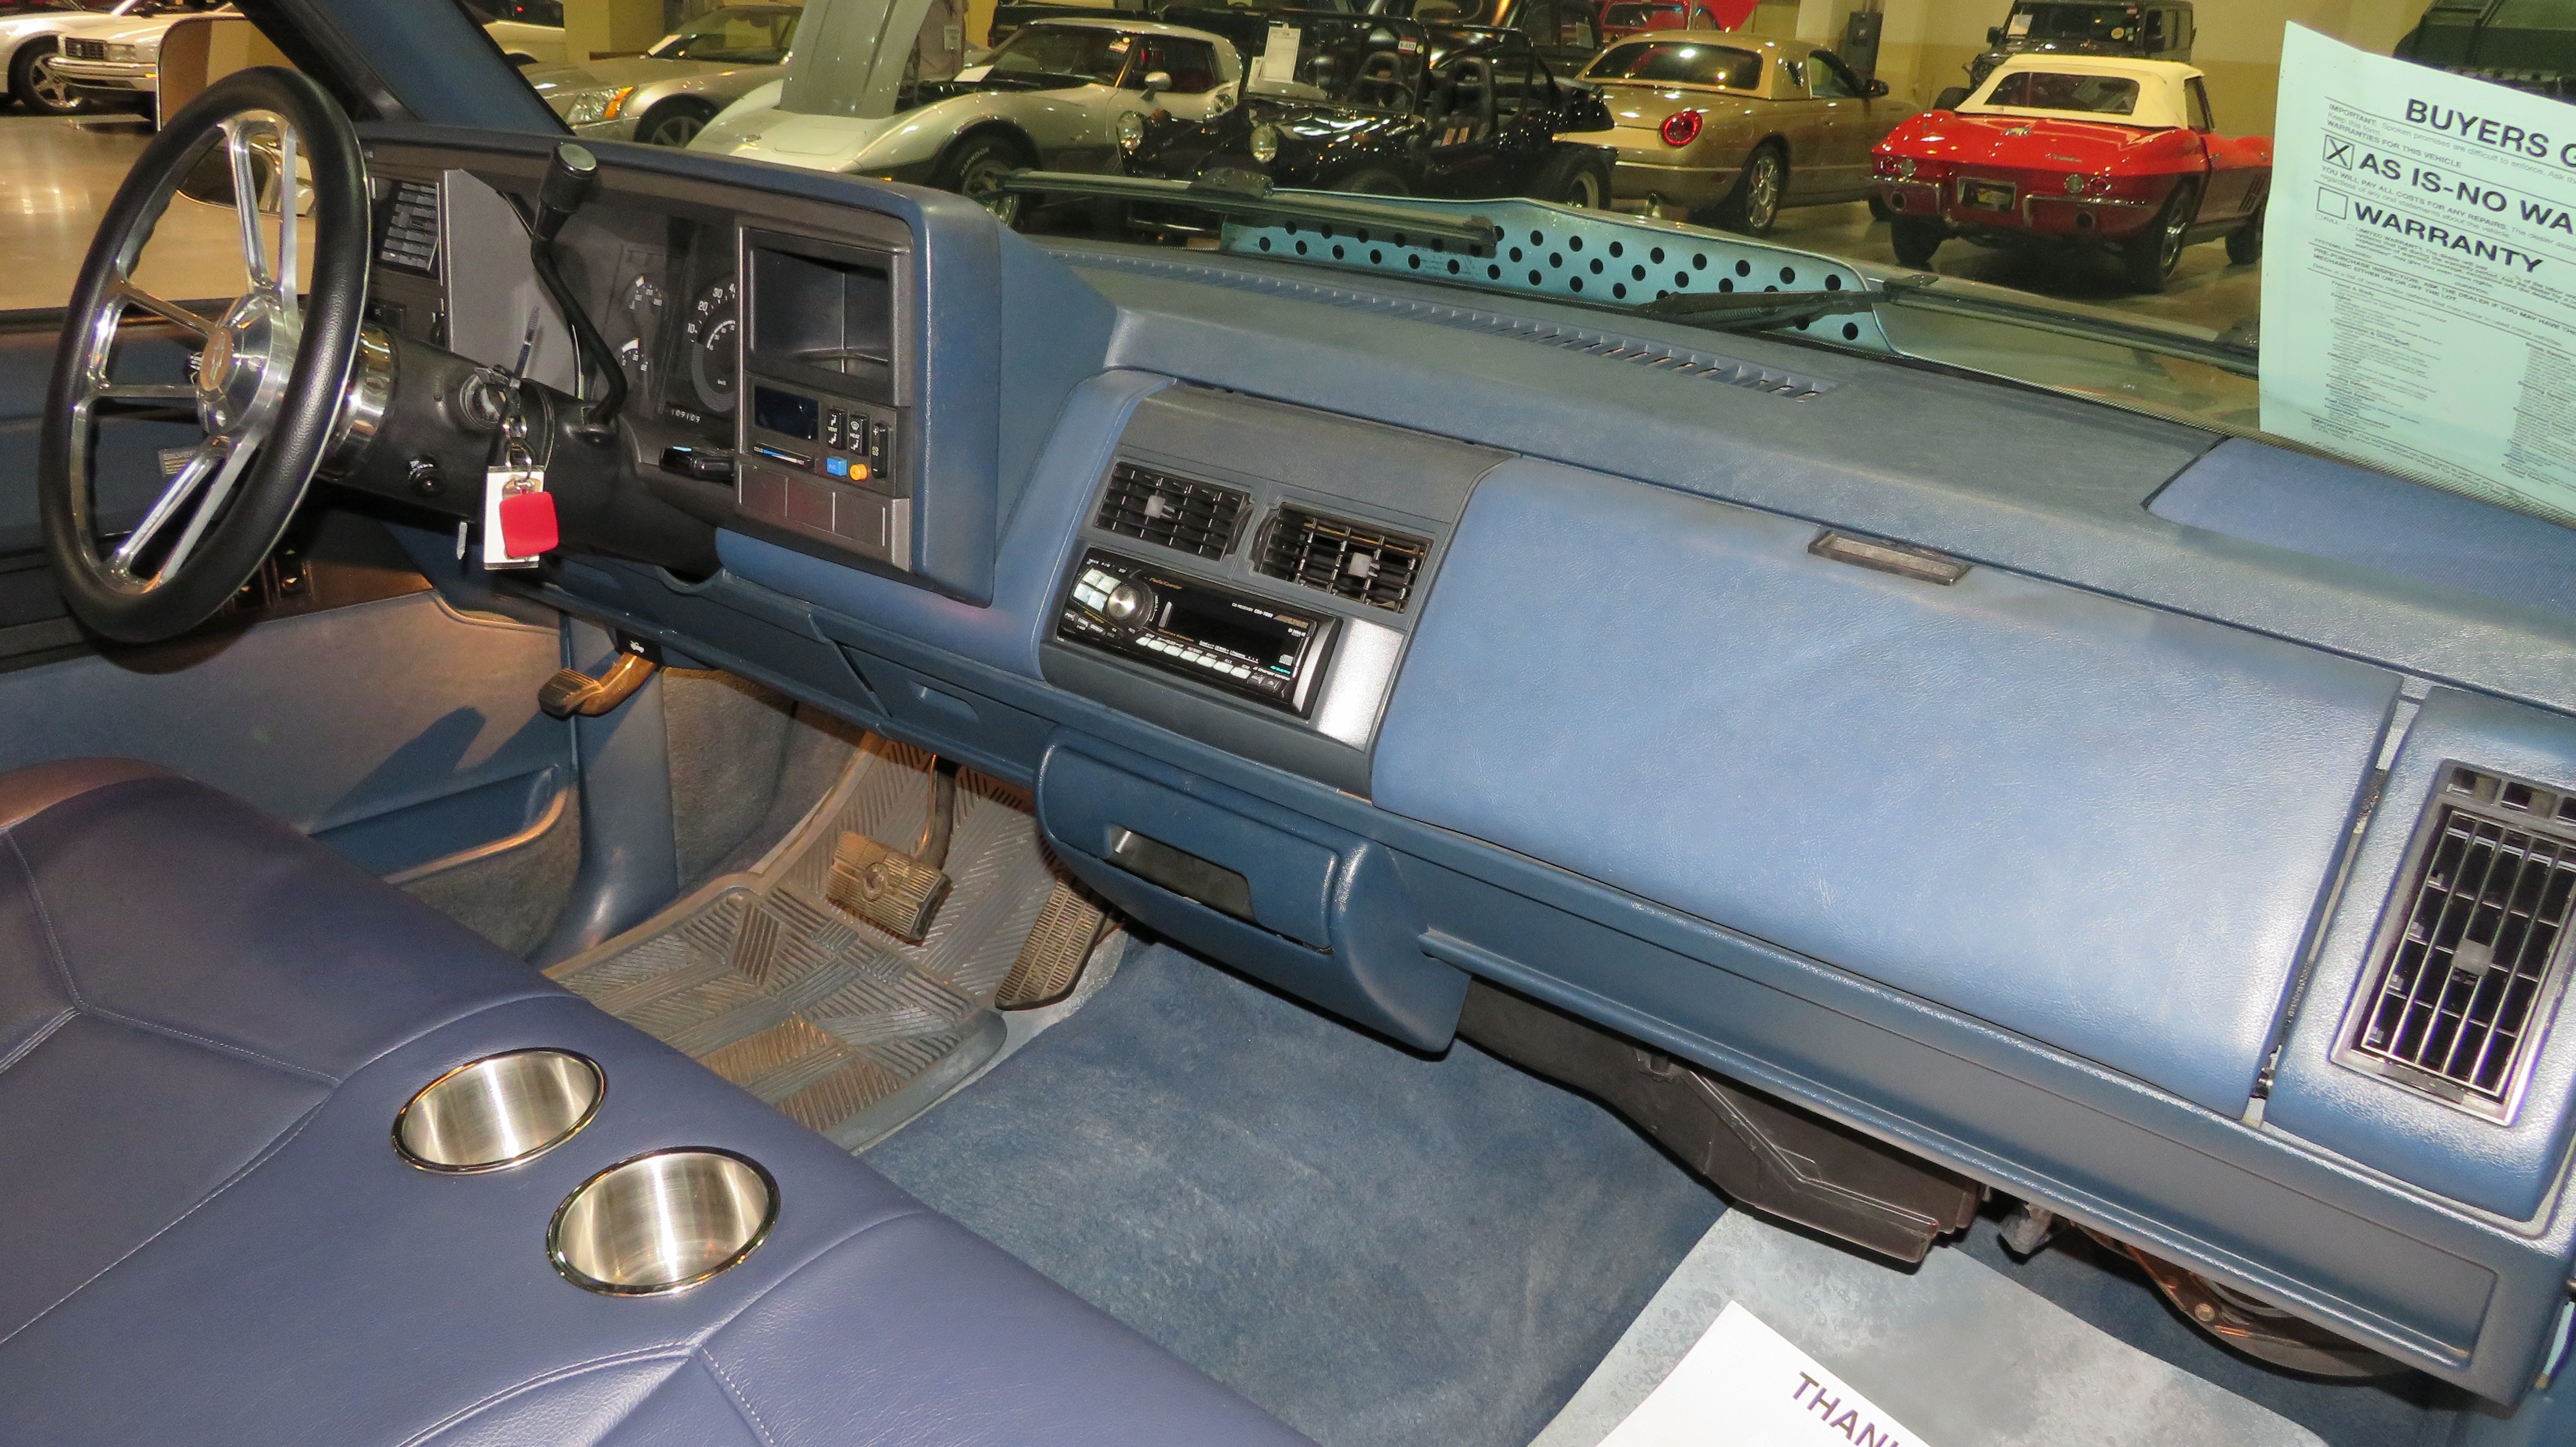 6th Image of a 1989 CHEVROLET C1500